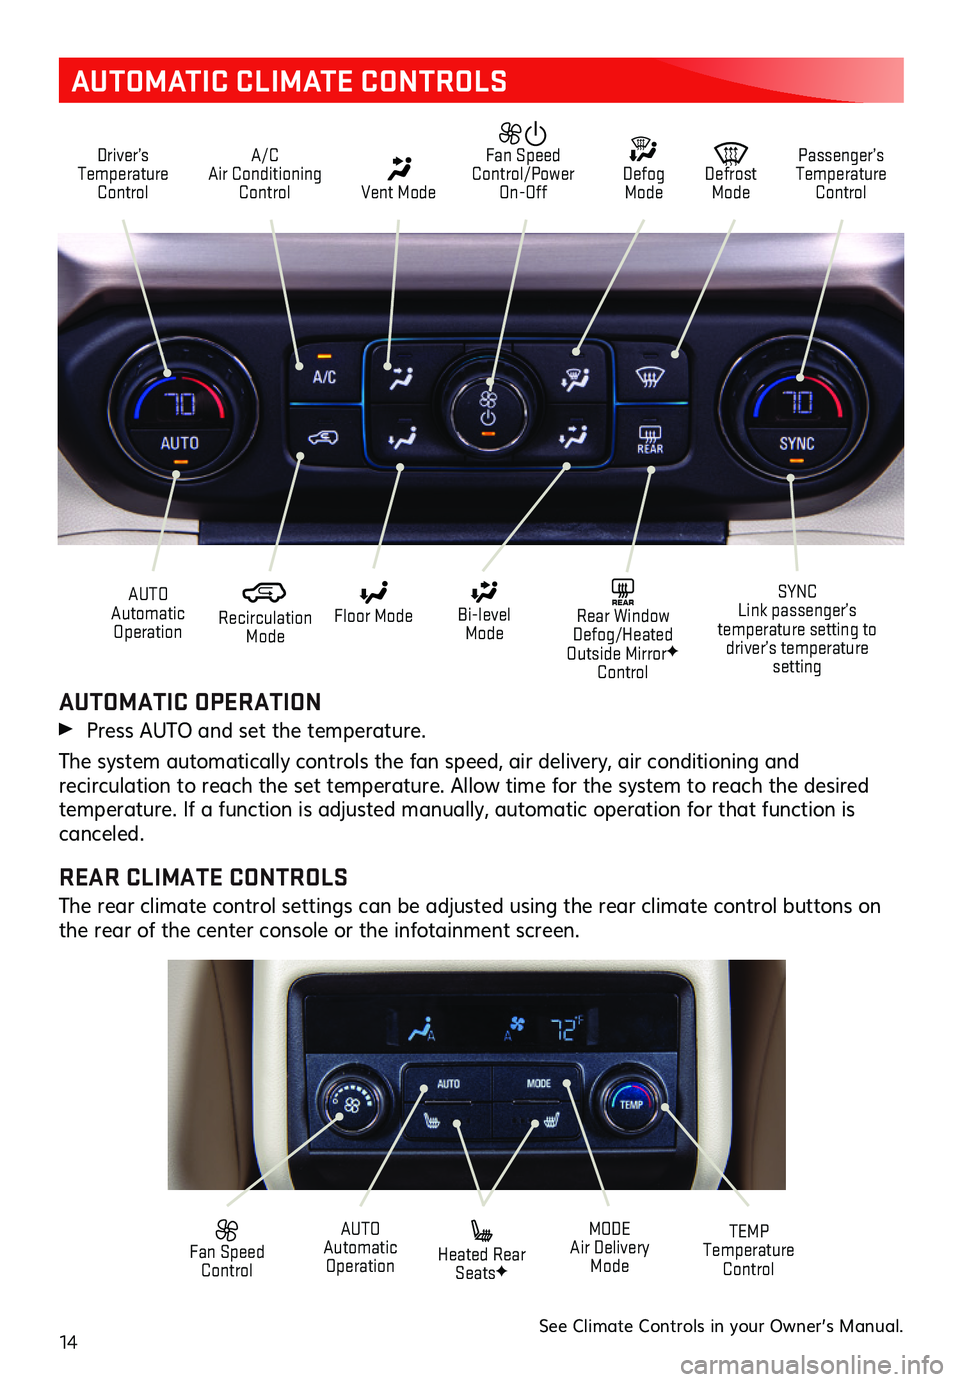 GMC ACADIA 2020  Get To Know Guide 14
AUTOMATIC CLIMATE CONTROLS
Driver’s Temperature Control
A/C Air Conditioning Control Vent Mode
  Defrost Mode
 Defog Mode
Passenger’s Temperature Control
  Fan Speed Control/Power On-Off
 Recir